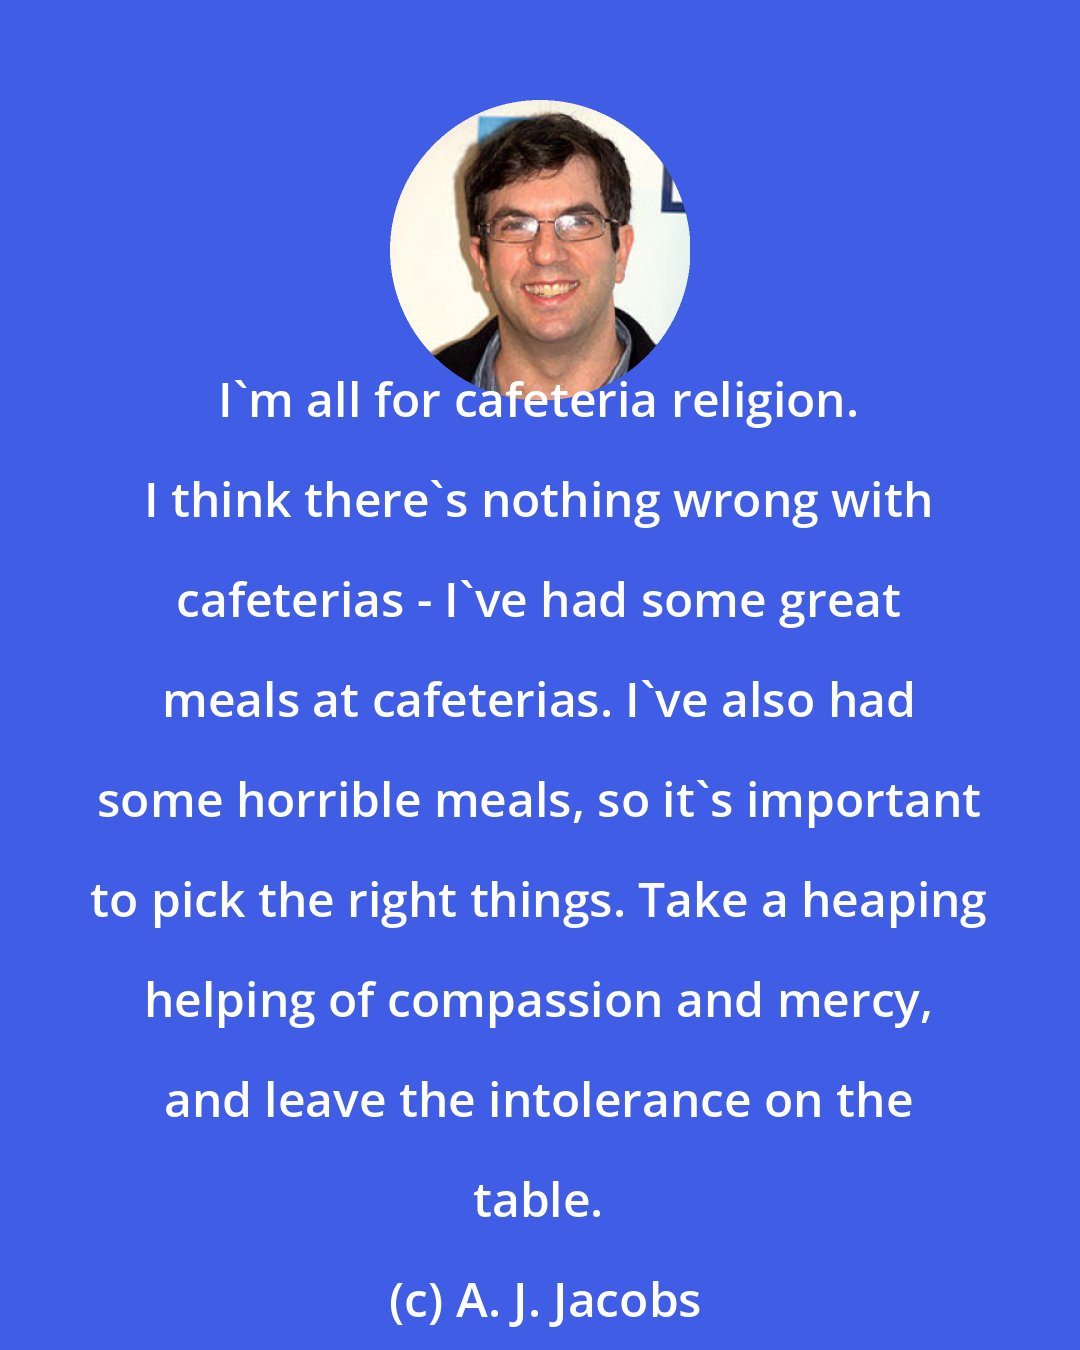 A. J. Jacobs: I'm all for cafeteria religion. I think there's nothing wrong with cafeterias - I've had some great meals at cafeterias. I've also had some horrible meals, so it's important to pick the right things. Take a heaping helping of compassion and mercy, and leave the intolerance on the table.